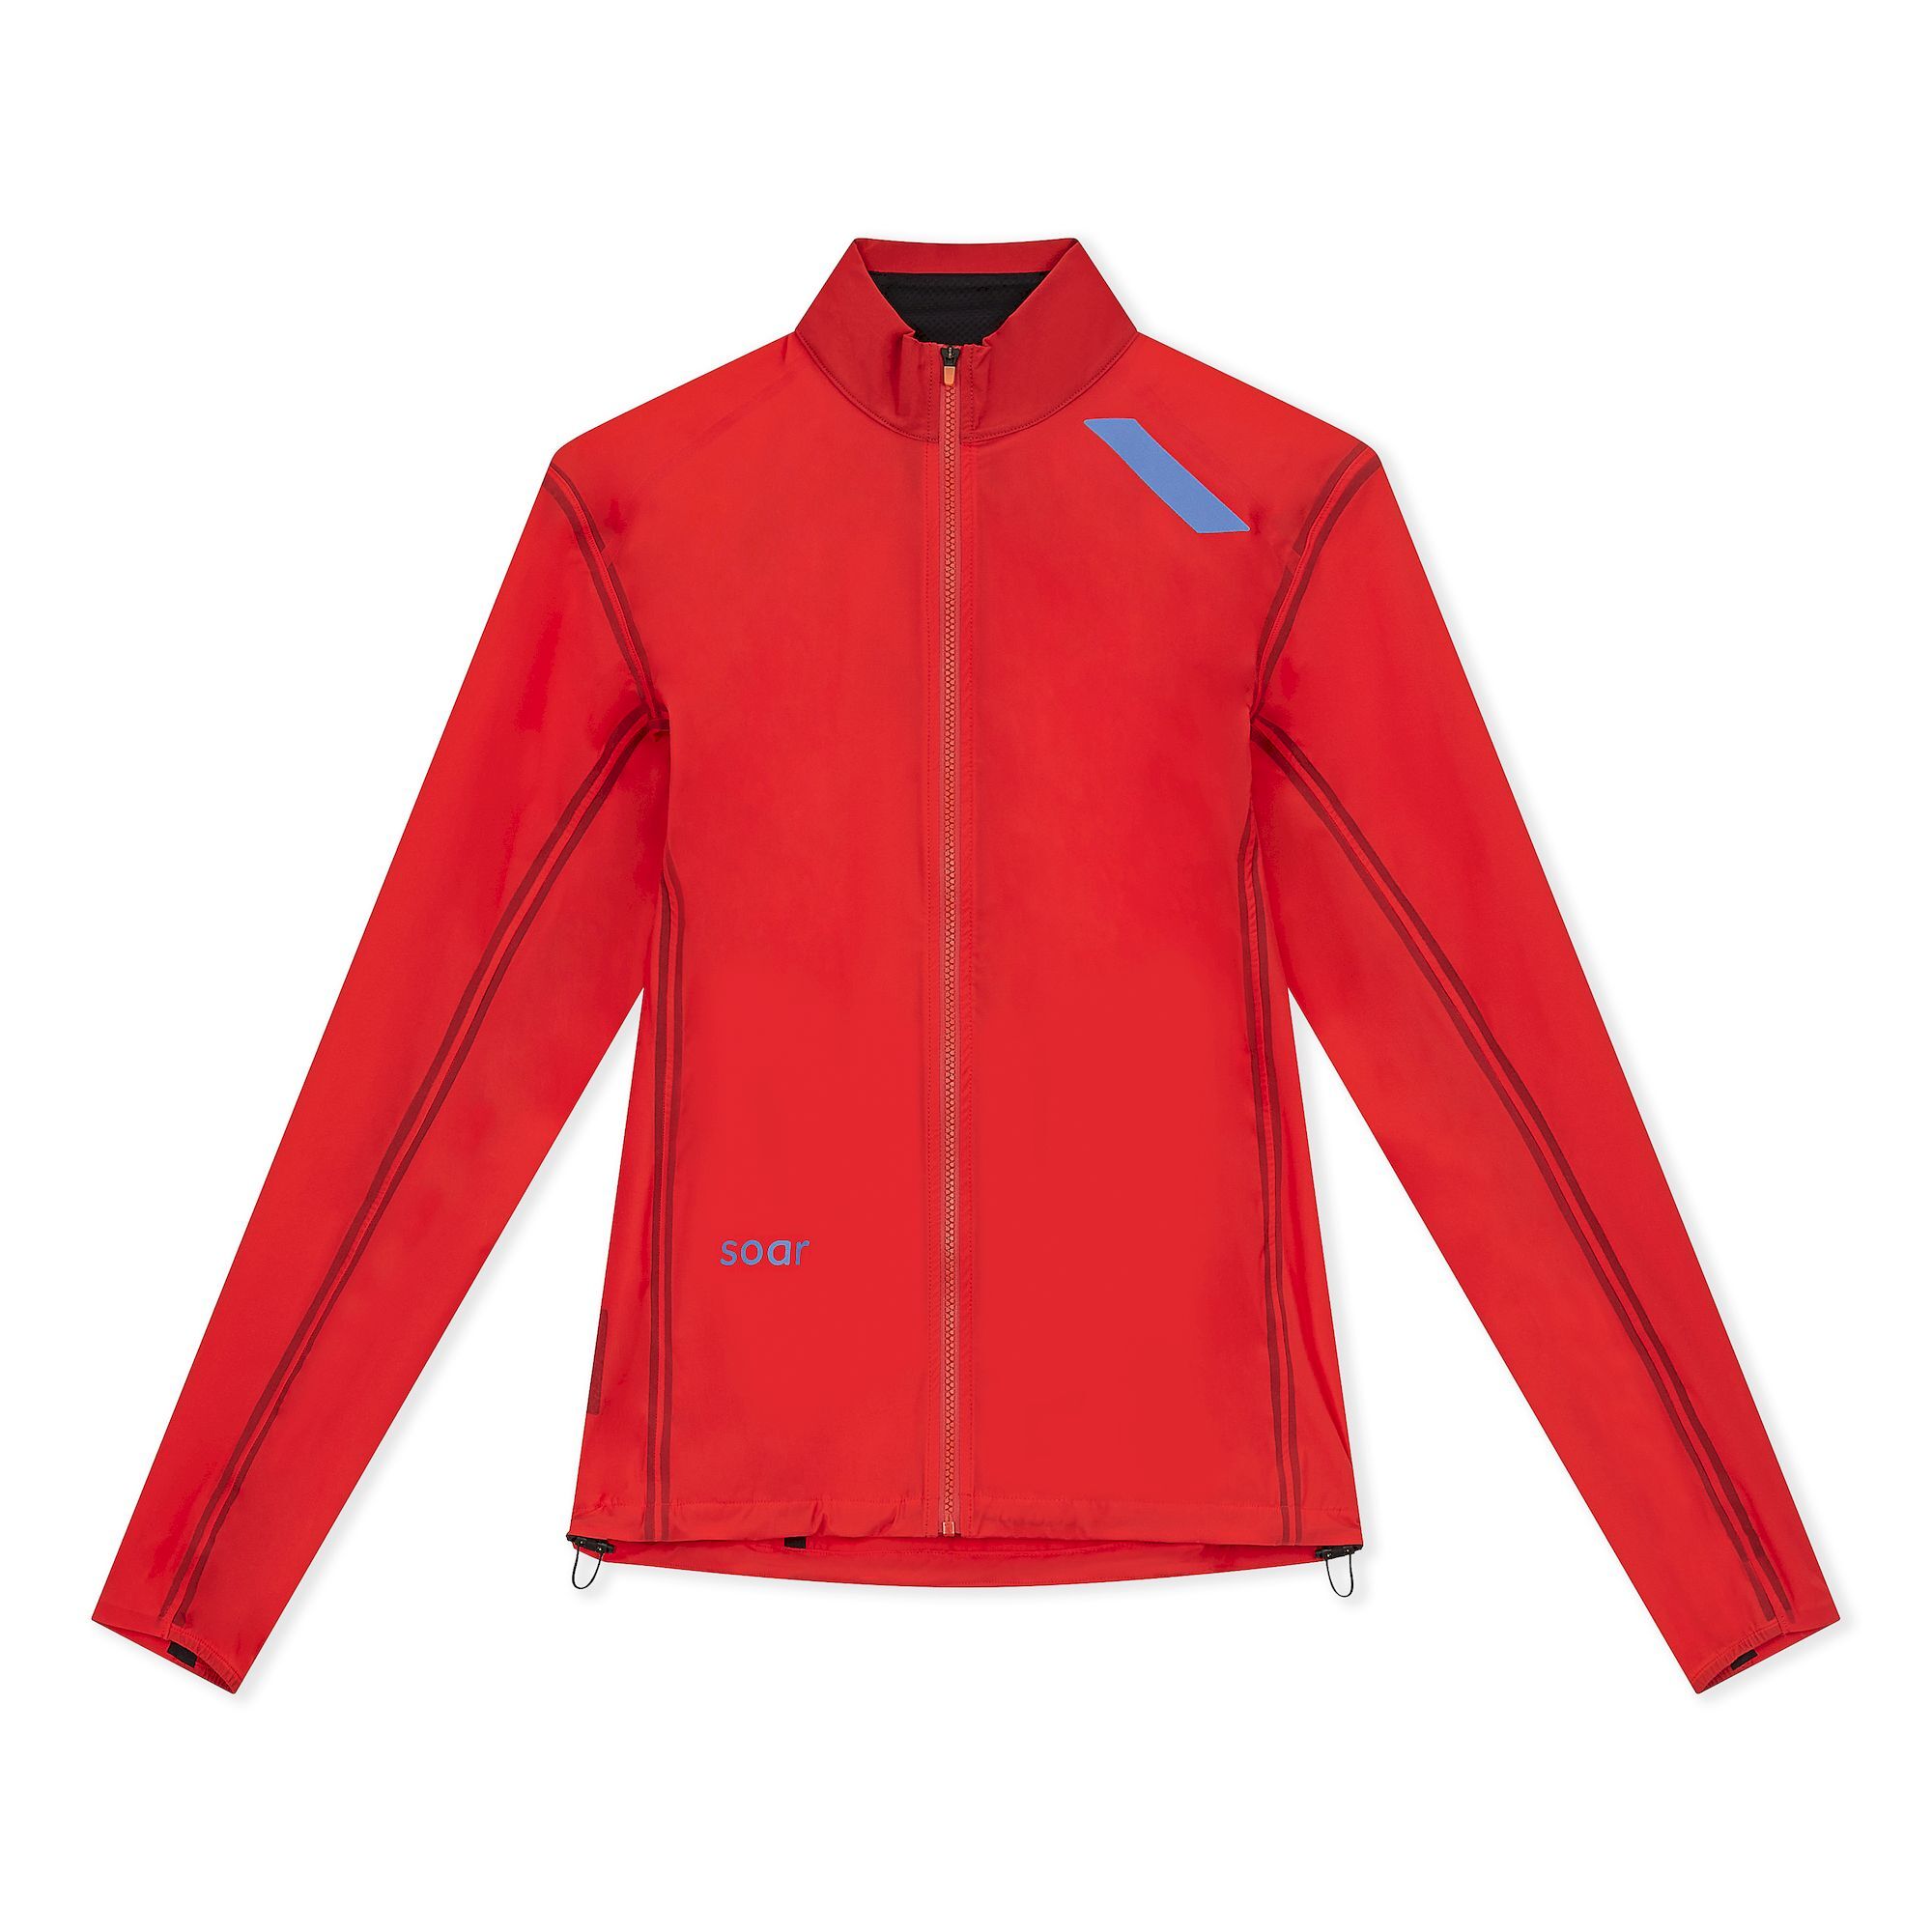 Soar Running Women's Ultra Jacket - Giacca a vento - Donna | Hardloop